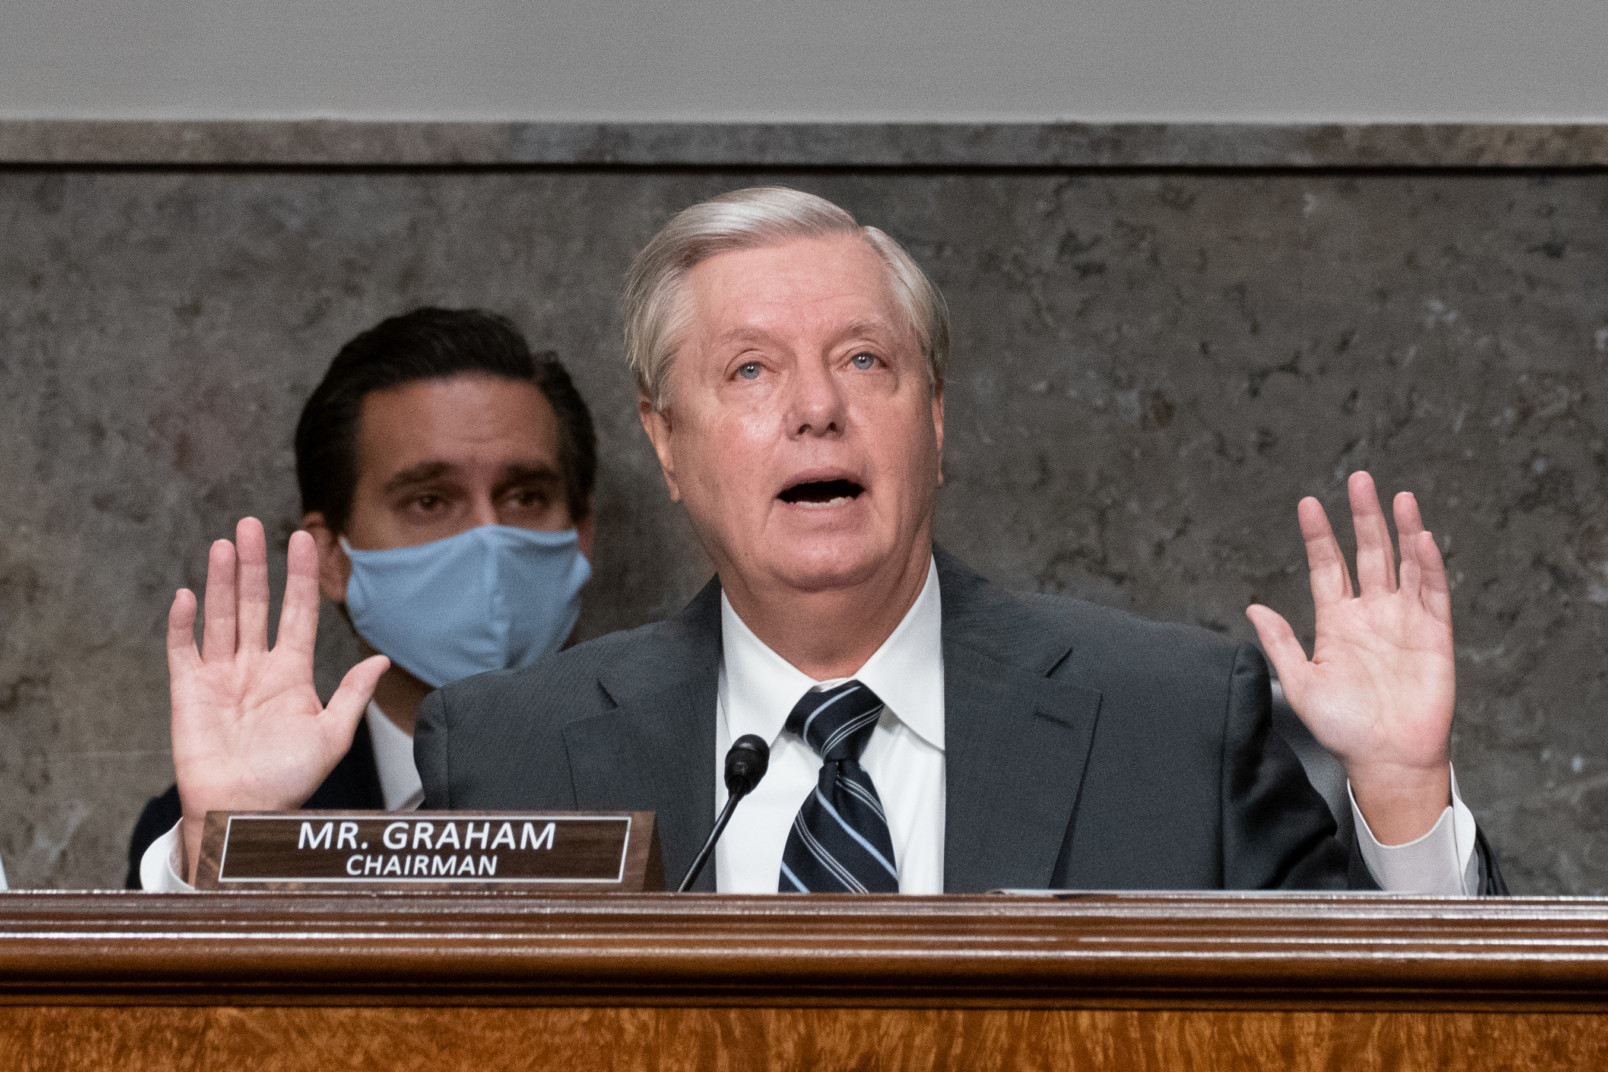 lindsey graham not guilty vote growing